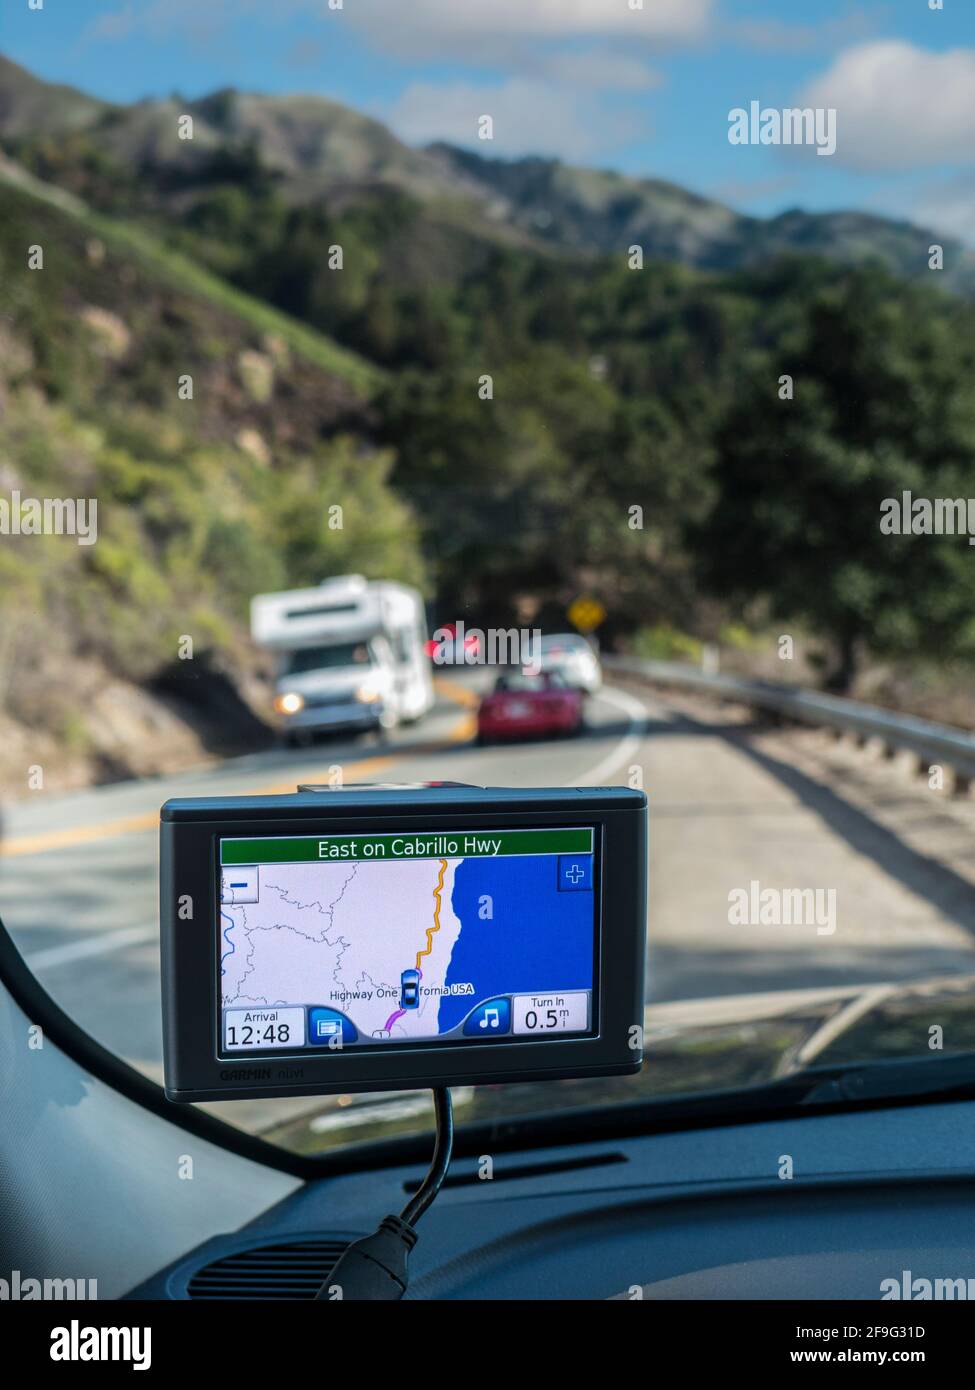 California Sat Nav HIGHWAY ONE Satellite Navigation Screen SatNav Sat Nav displaying Highway 1 One, East on Cabrillo Highway with cars and Motorhome RV on vacation tour drive on popular coastal Pacific route.  Monterey, Pacific Ocean, California USA Stock Photo